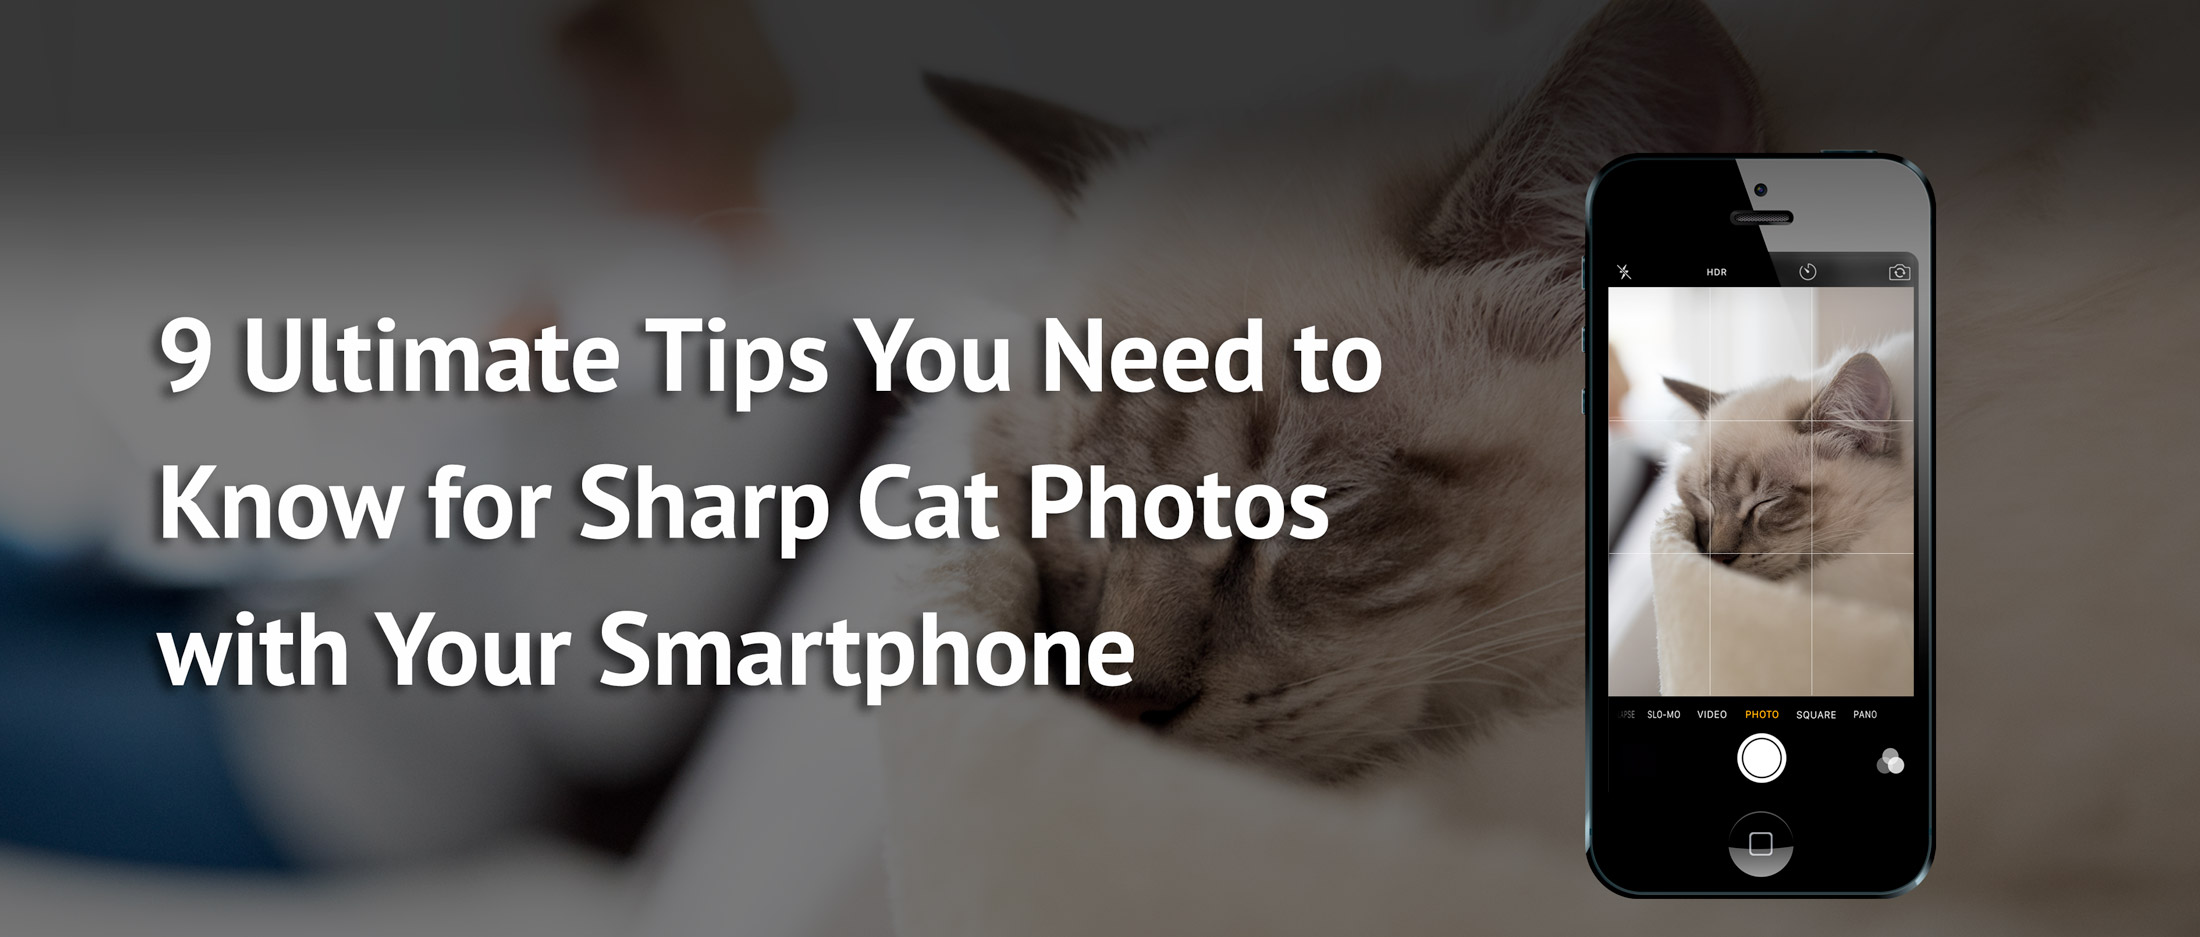 the best and ultimate tips for taking sharp pictures with your smartphone or iPhone